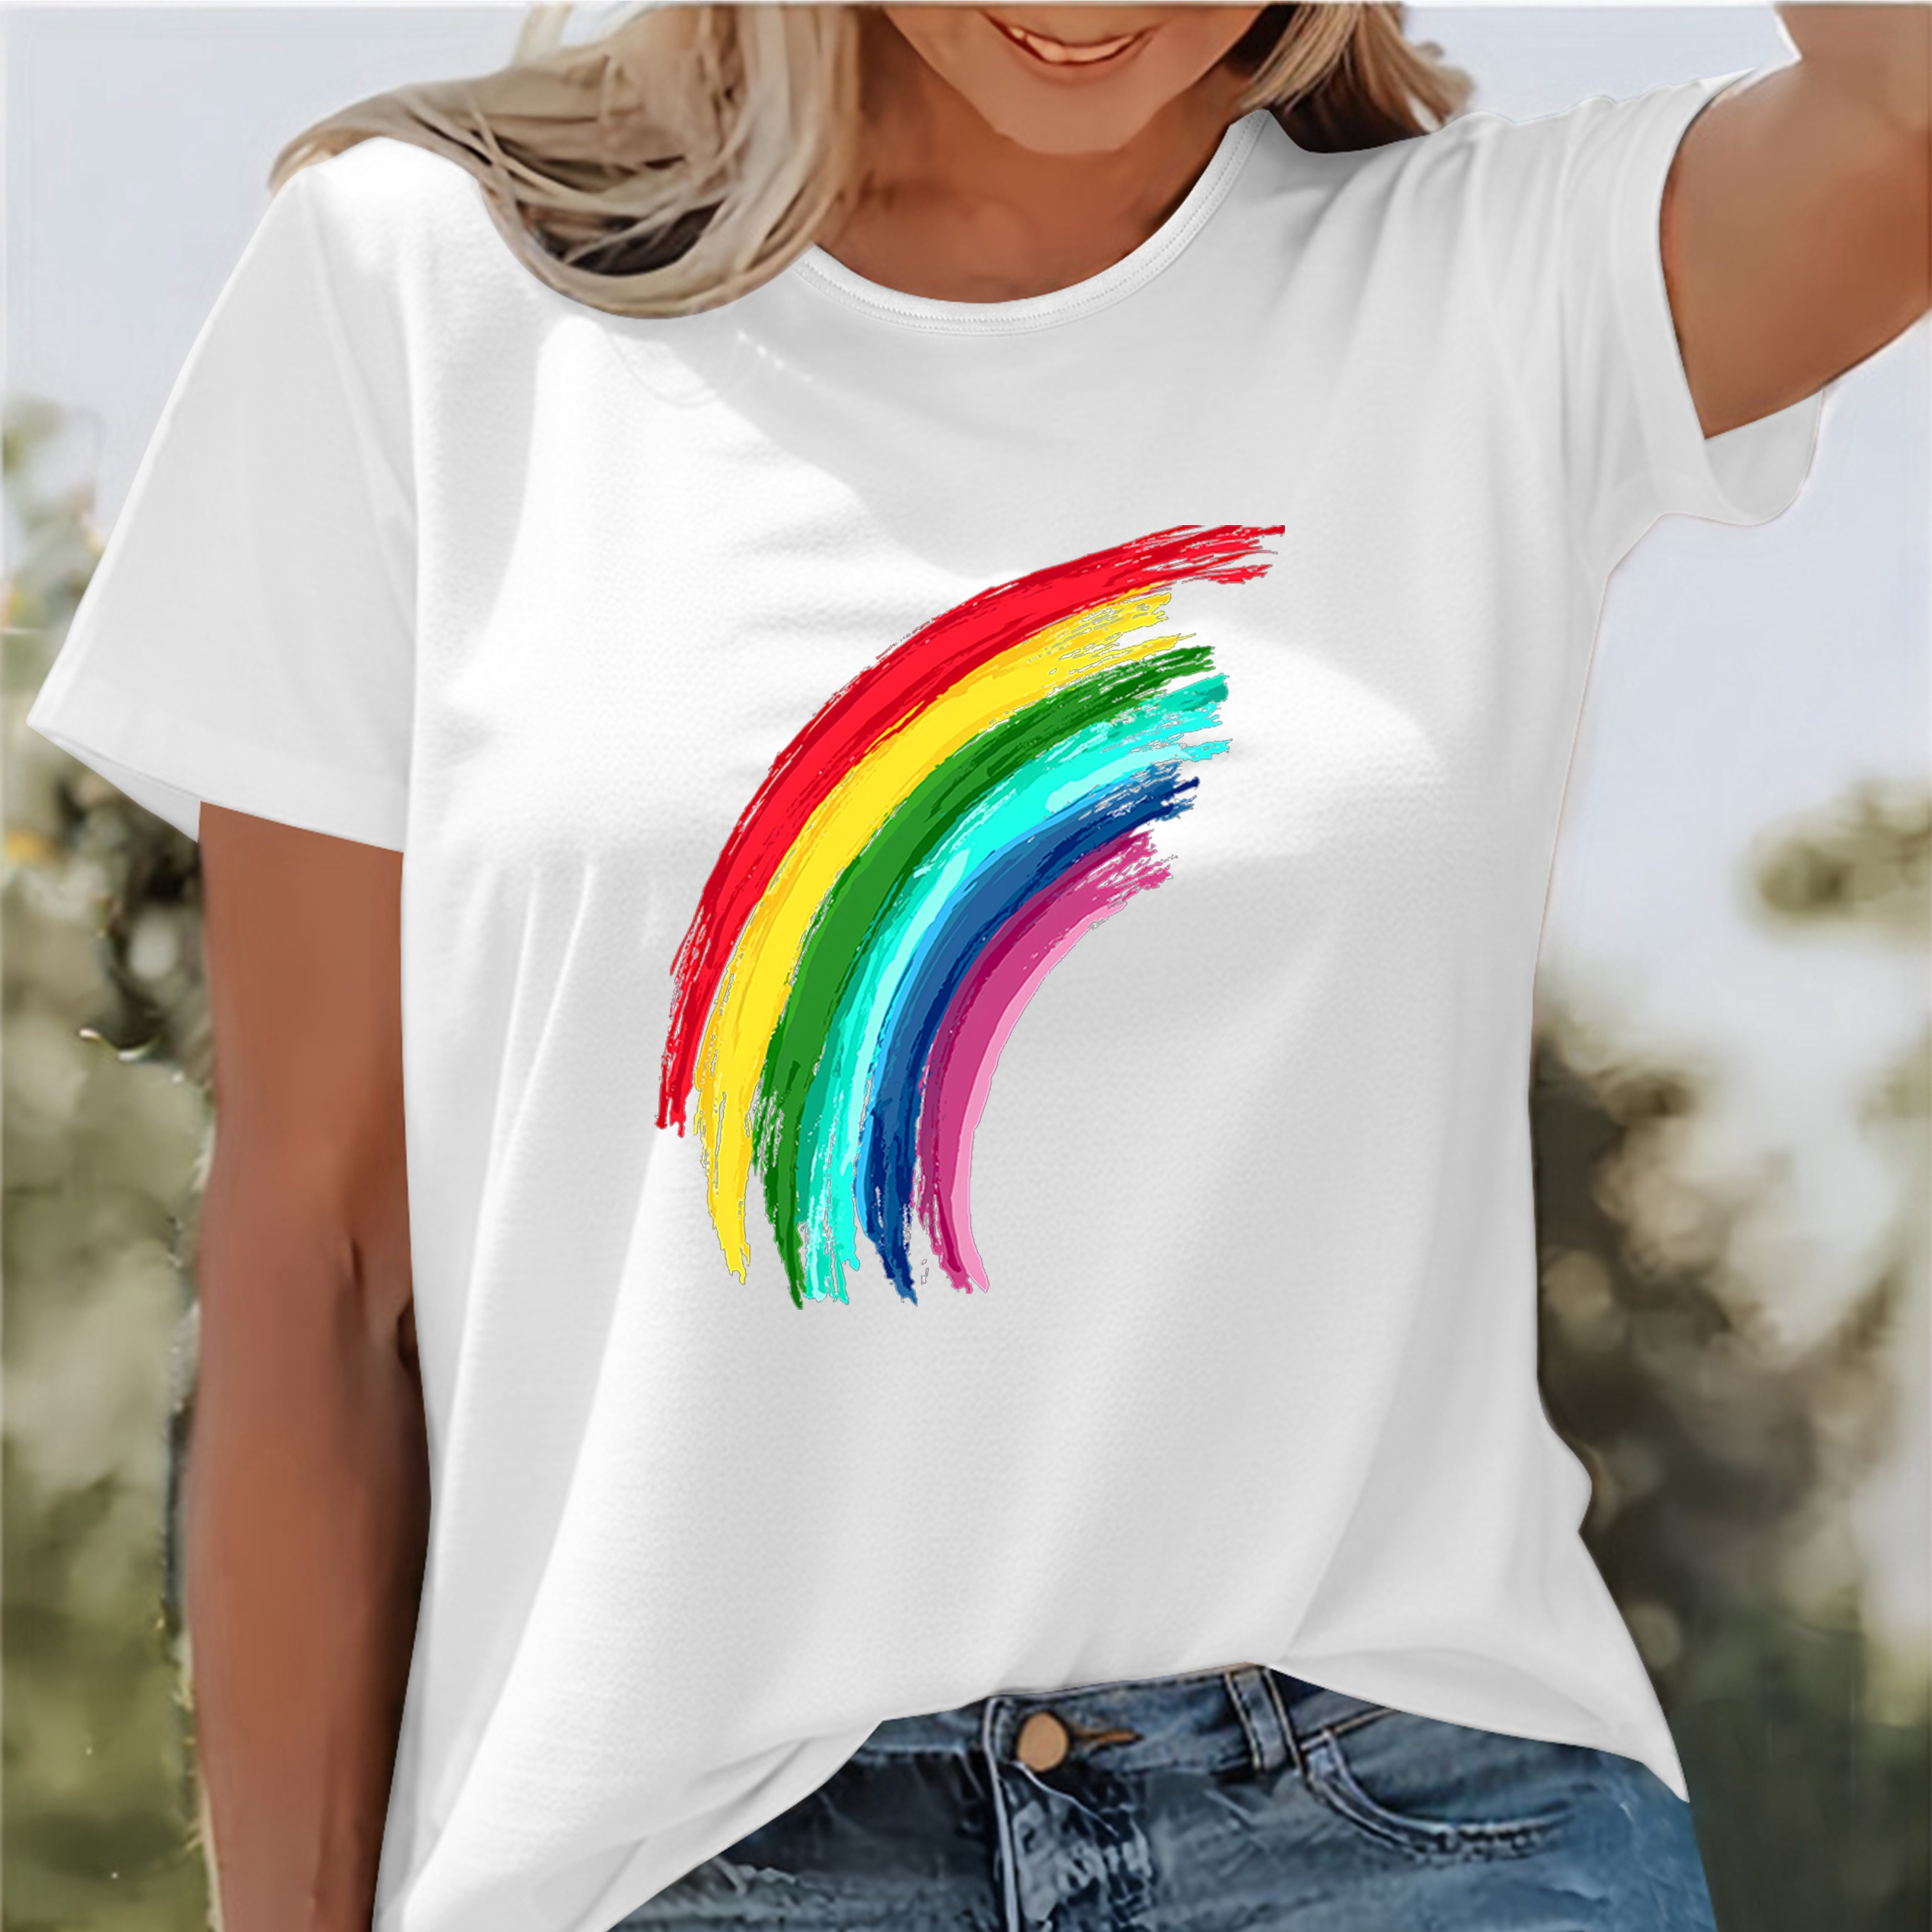 

Rainbow Print T-shirt, Short Sleeve Crew Neck Casual Top For Summer & Spring, Women's Clothing